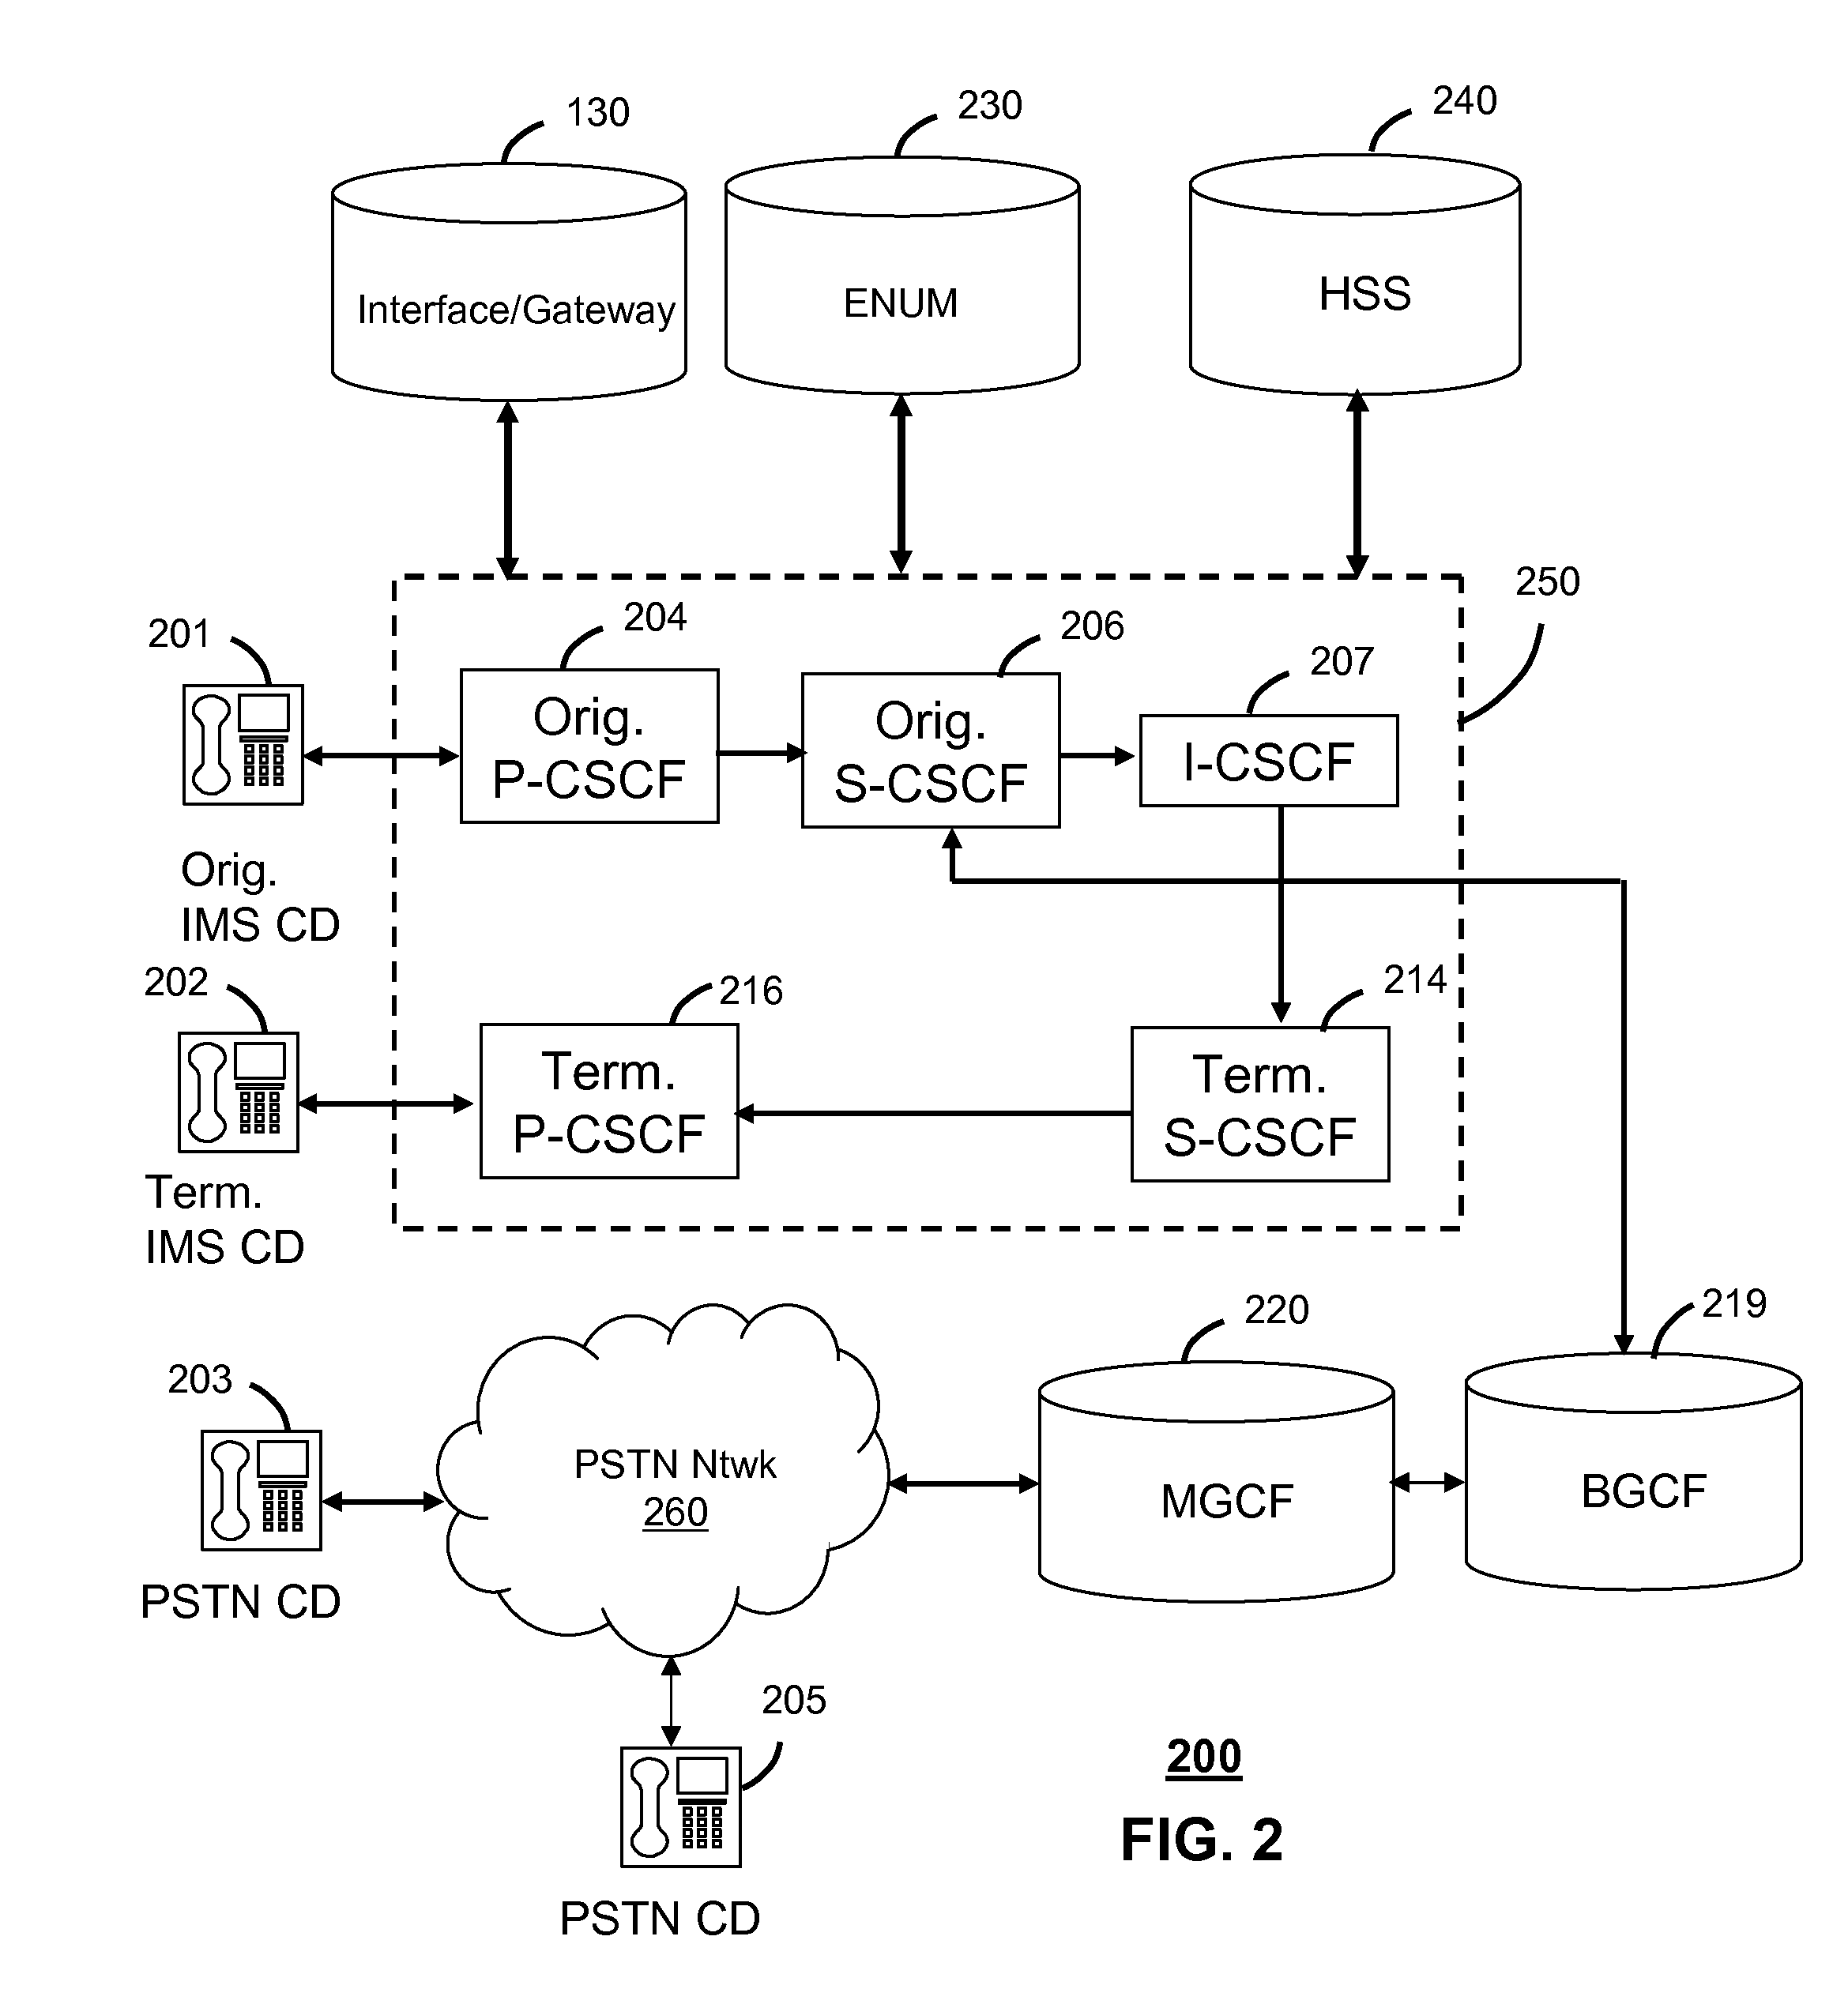 Apparatus and Method for Providing Presence